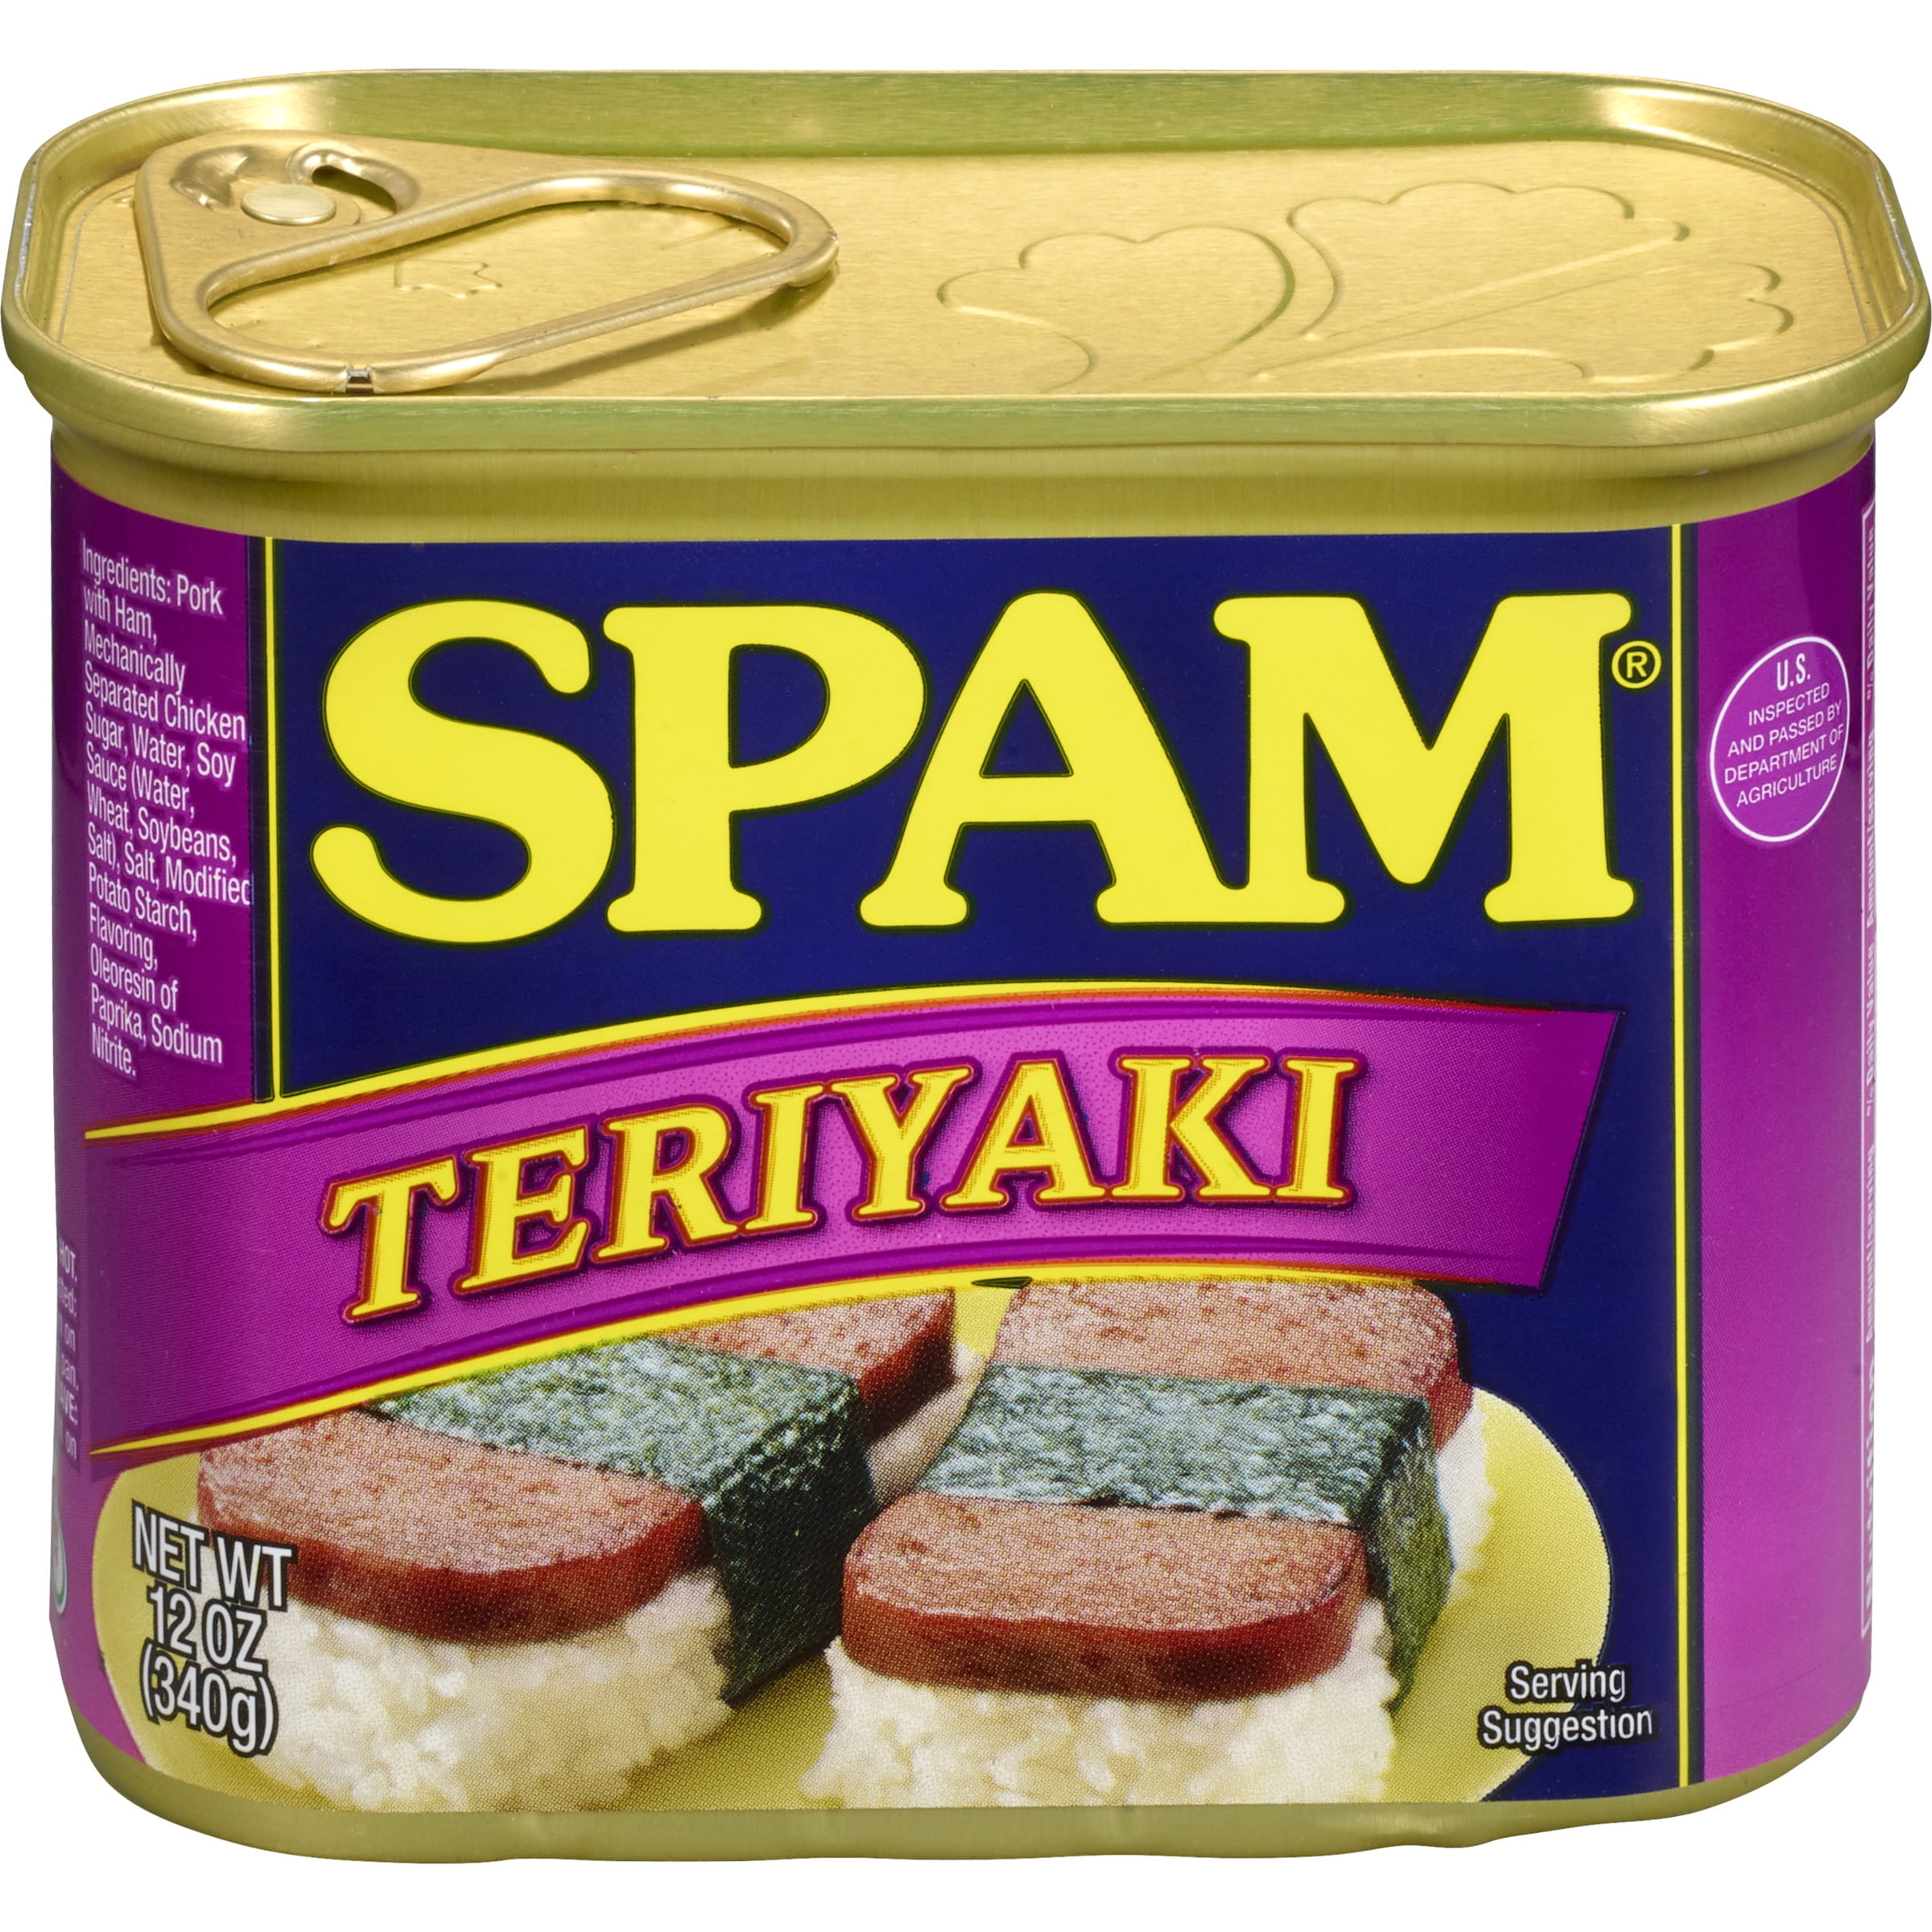 The King of Canned Meats - Let's make this Teriyaki Spam Jerky Recipe.